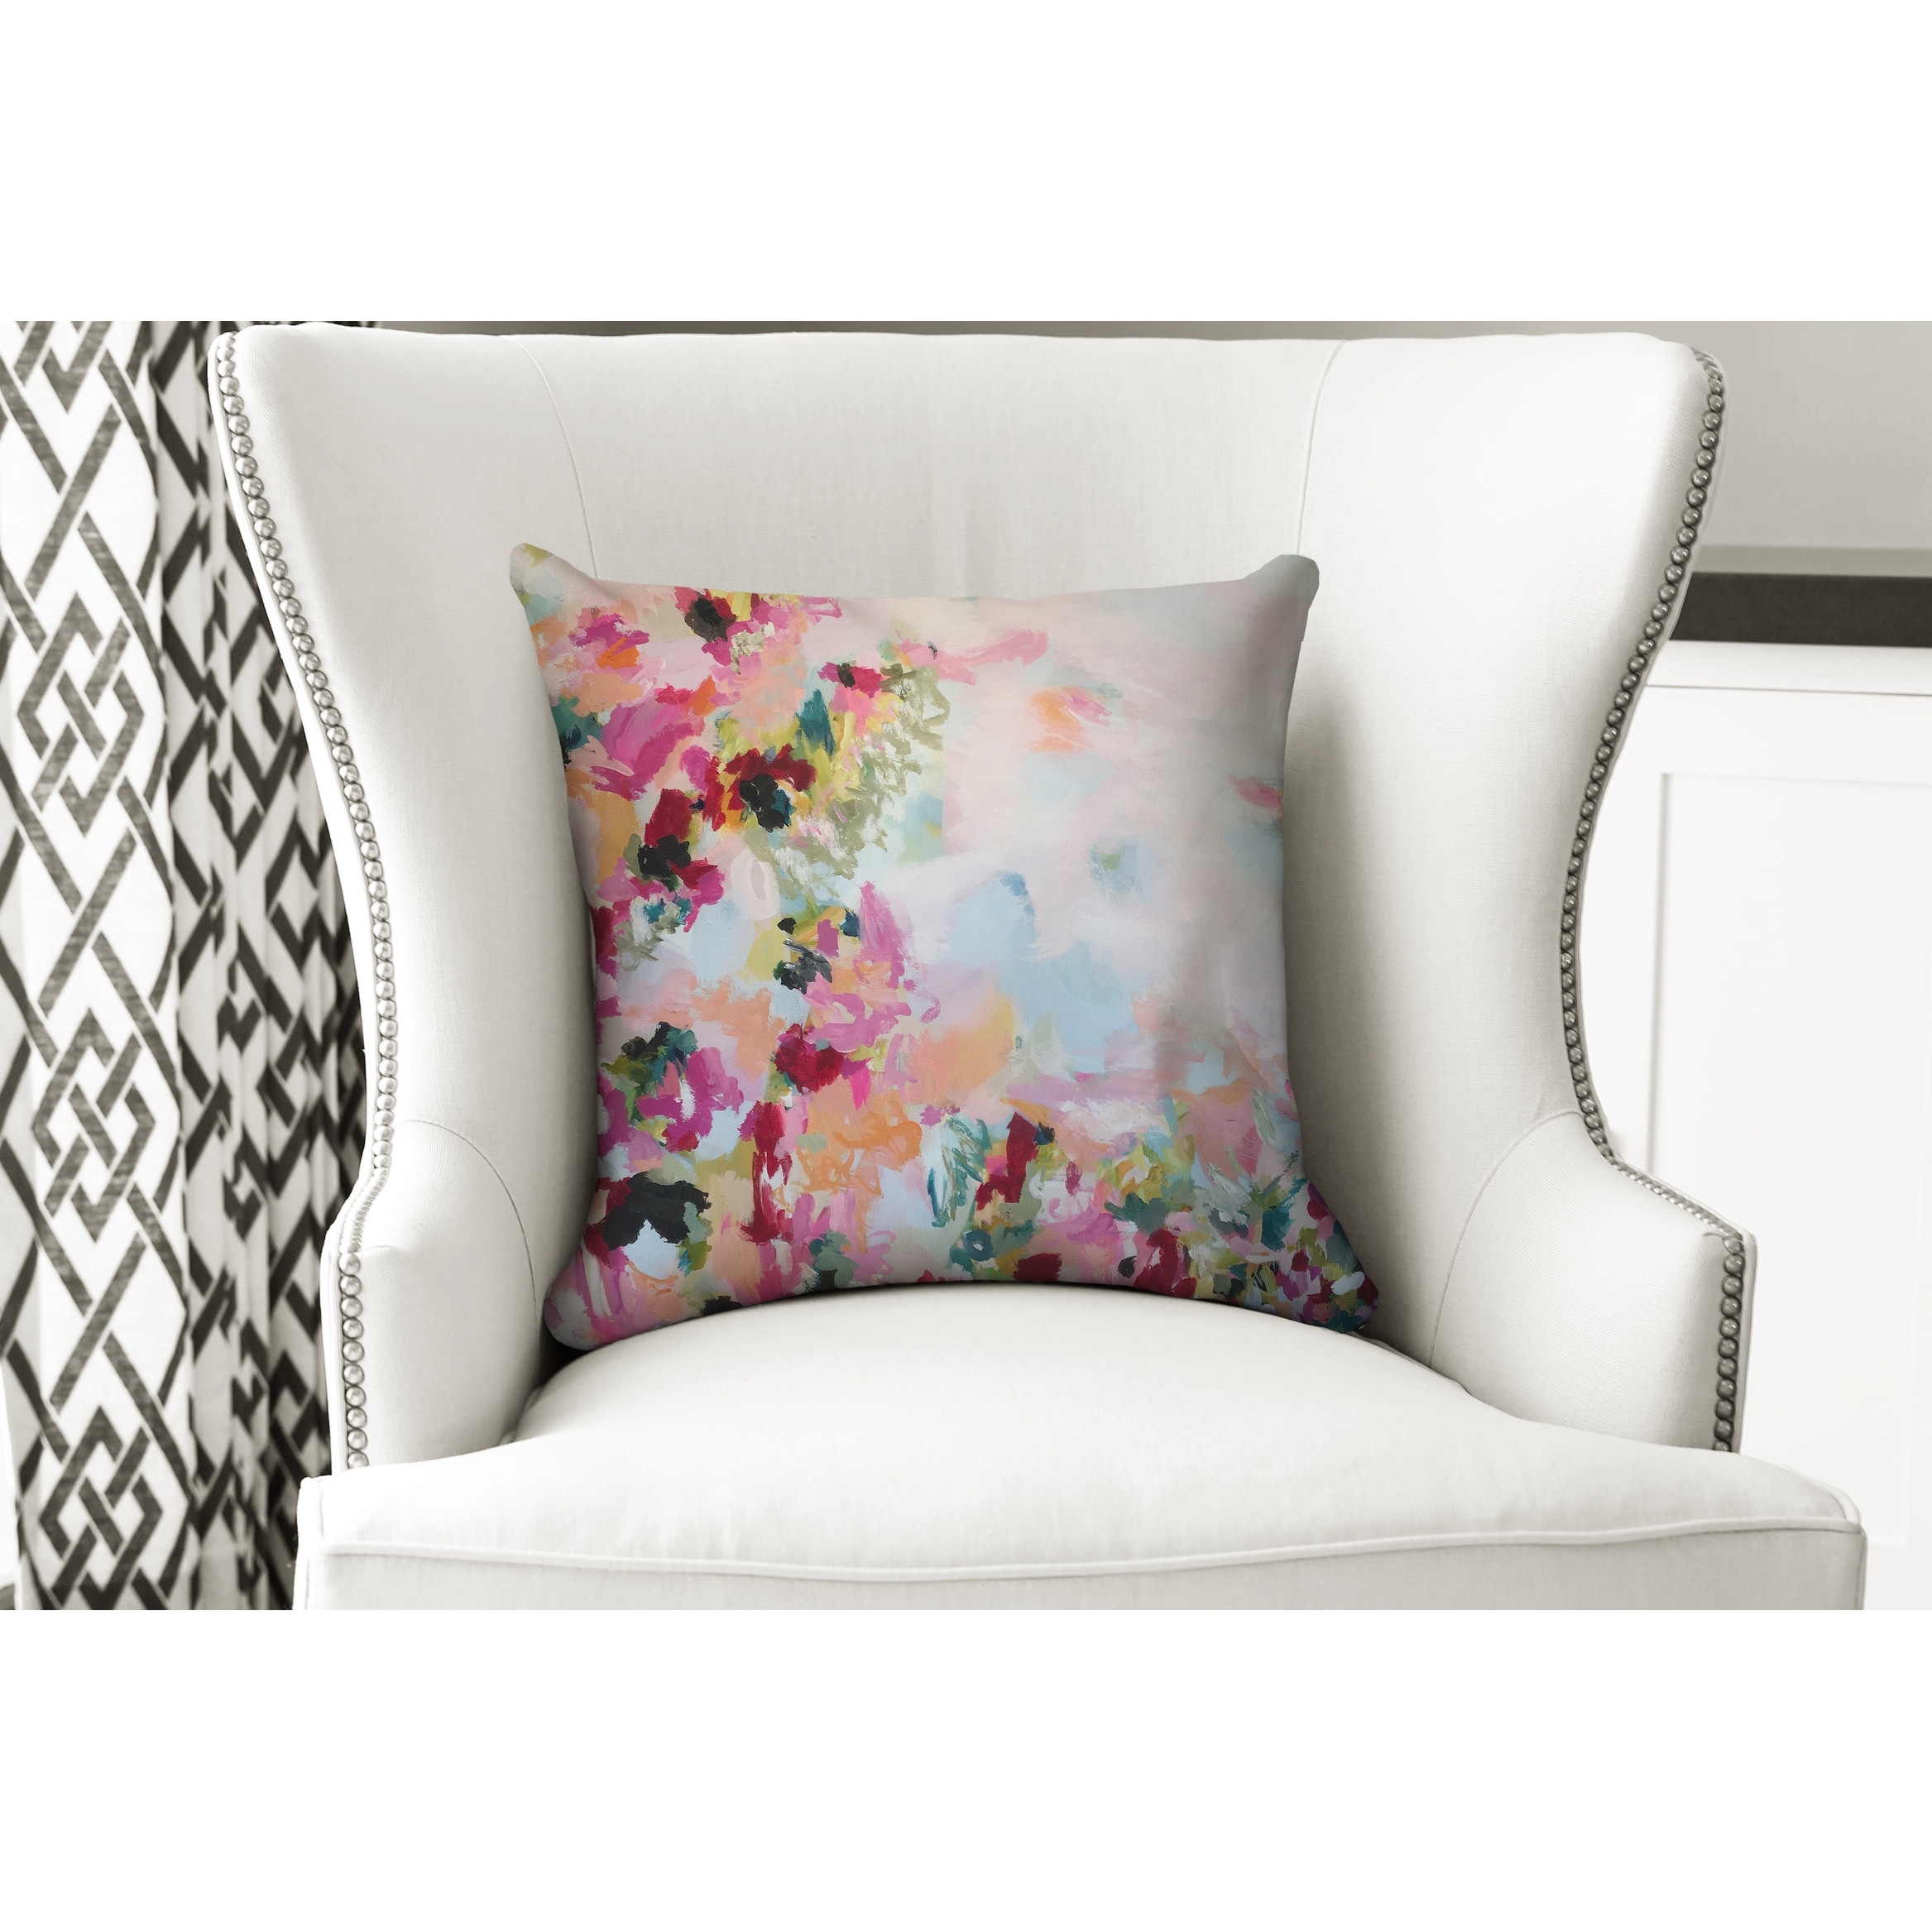 KAVKA Designs To Be Your Sweetheart Accent Pillow, - TRADITIONS Collection Size: 24X24X6 - Green/Pink/Red TELAVC8171DI24 